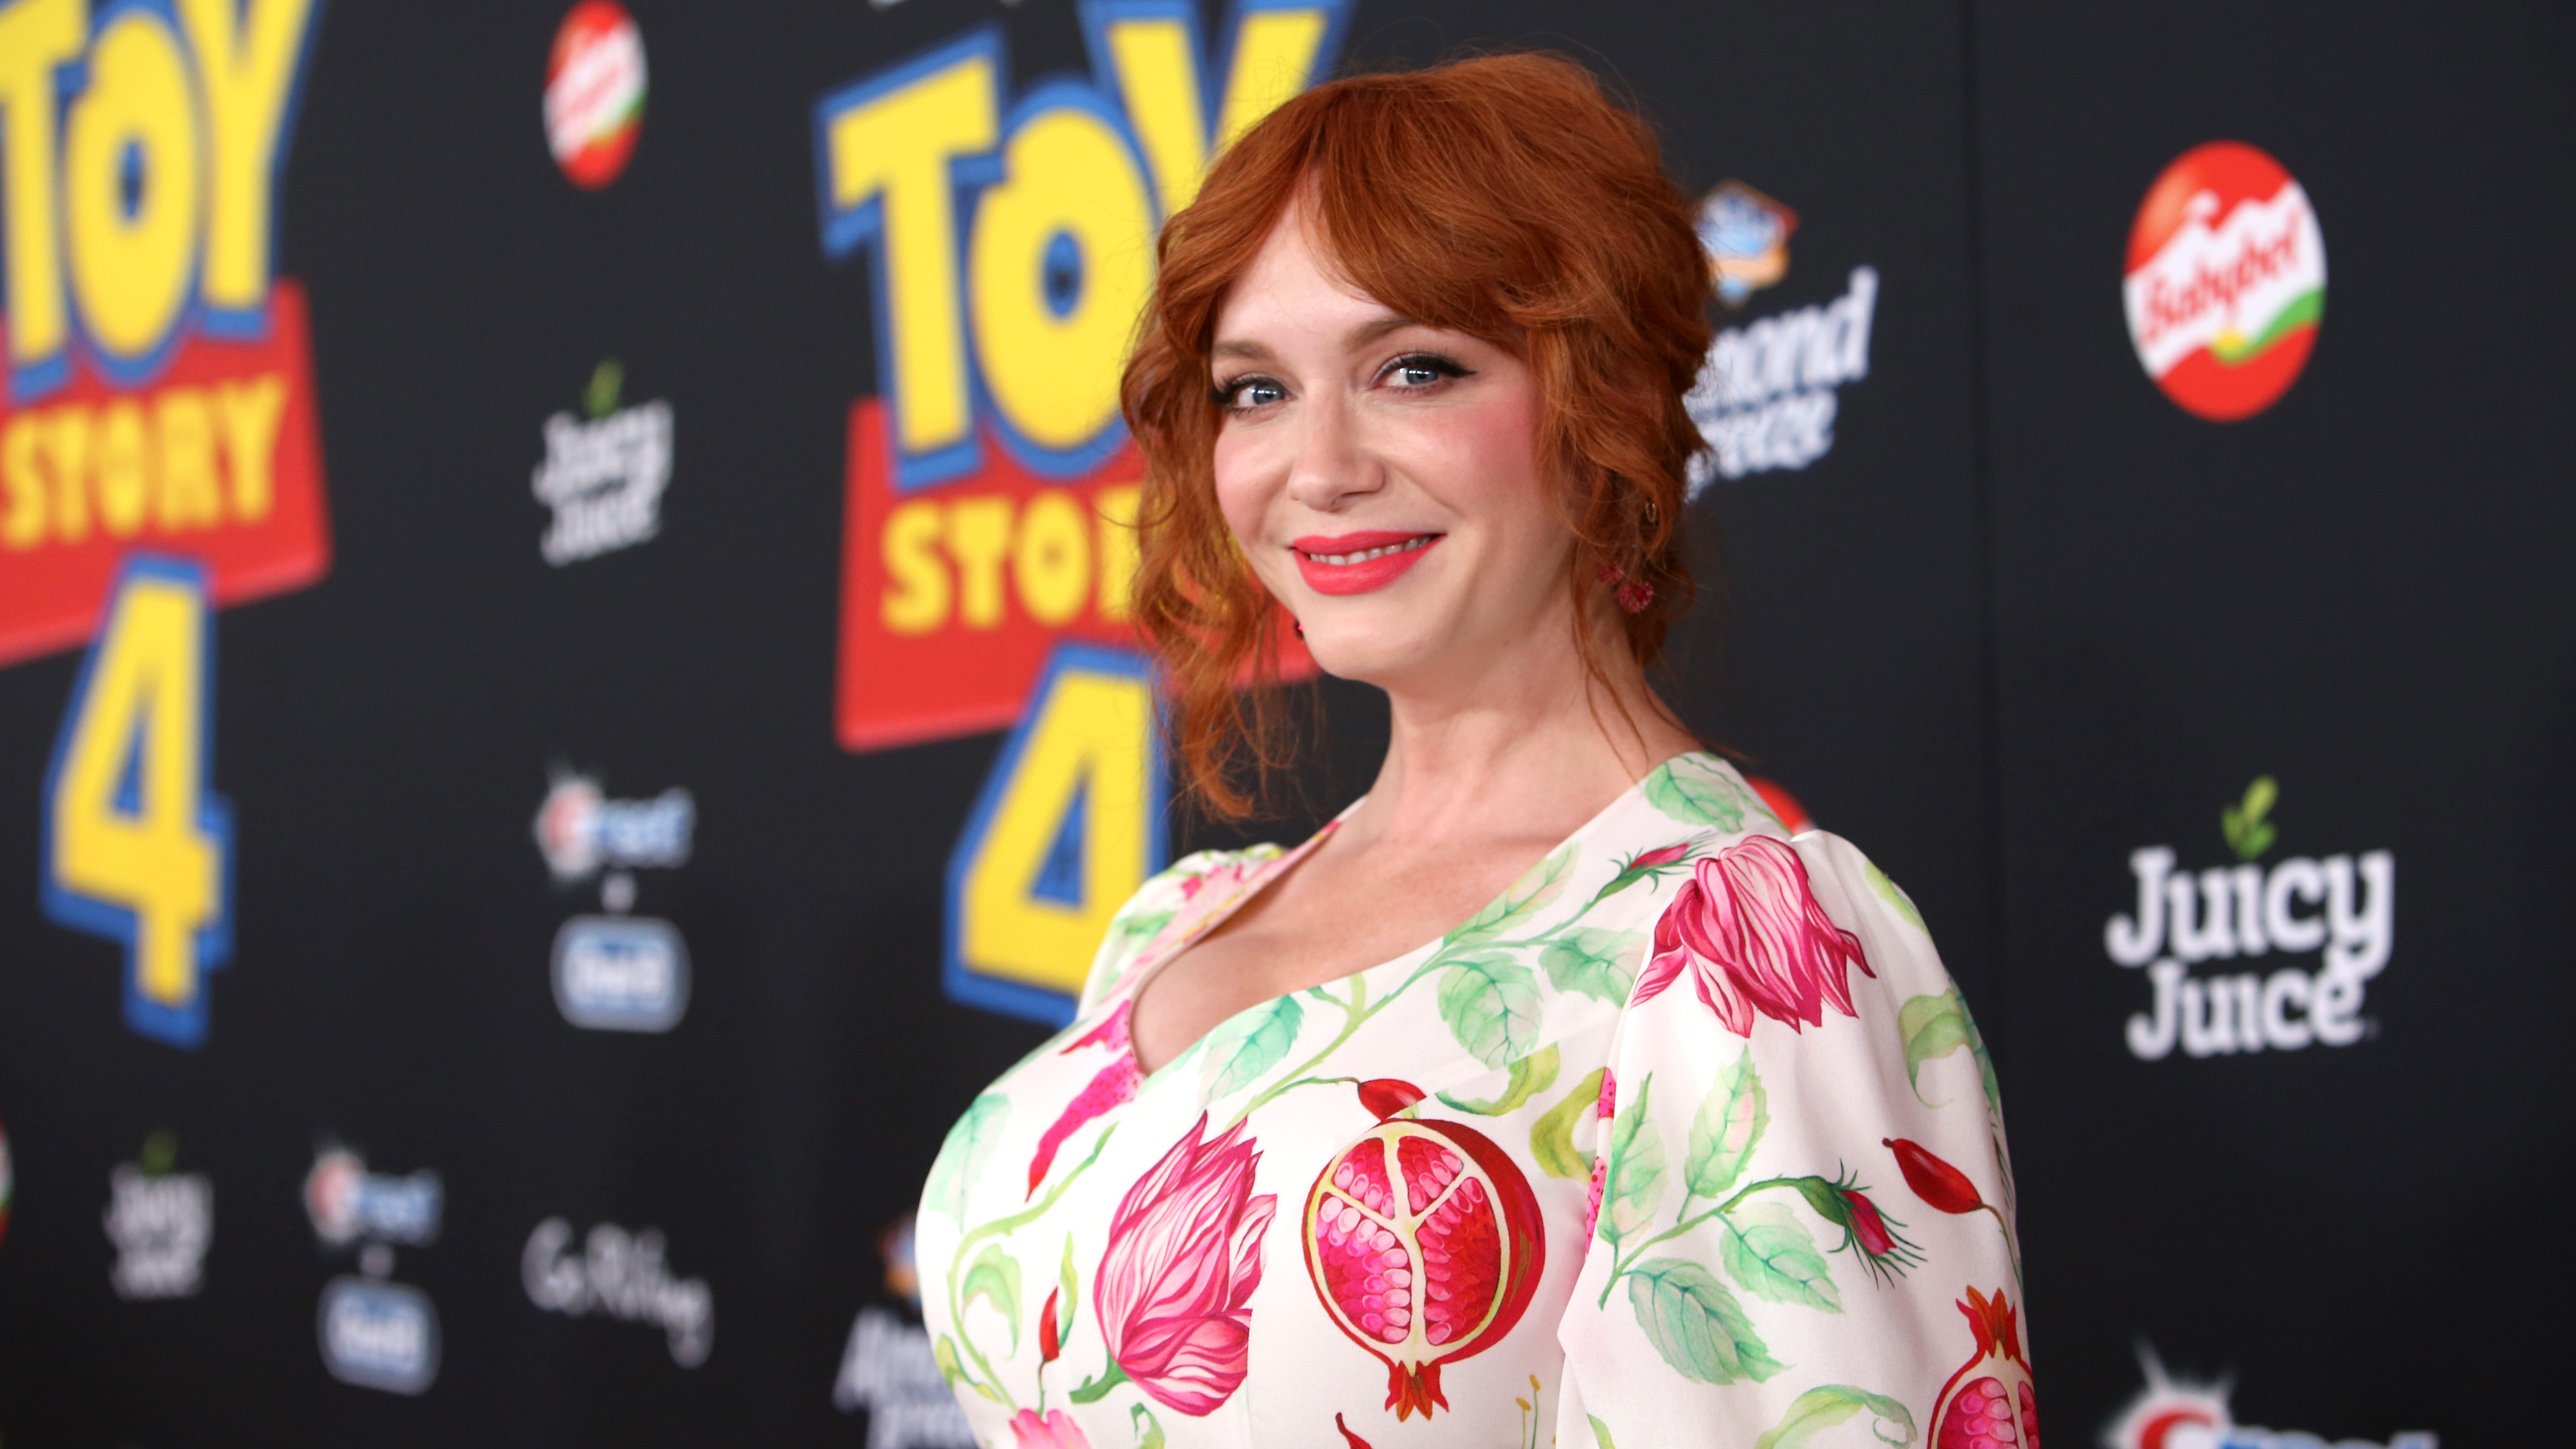 colin rideout recommends christina hendricks boobs real pic